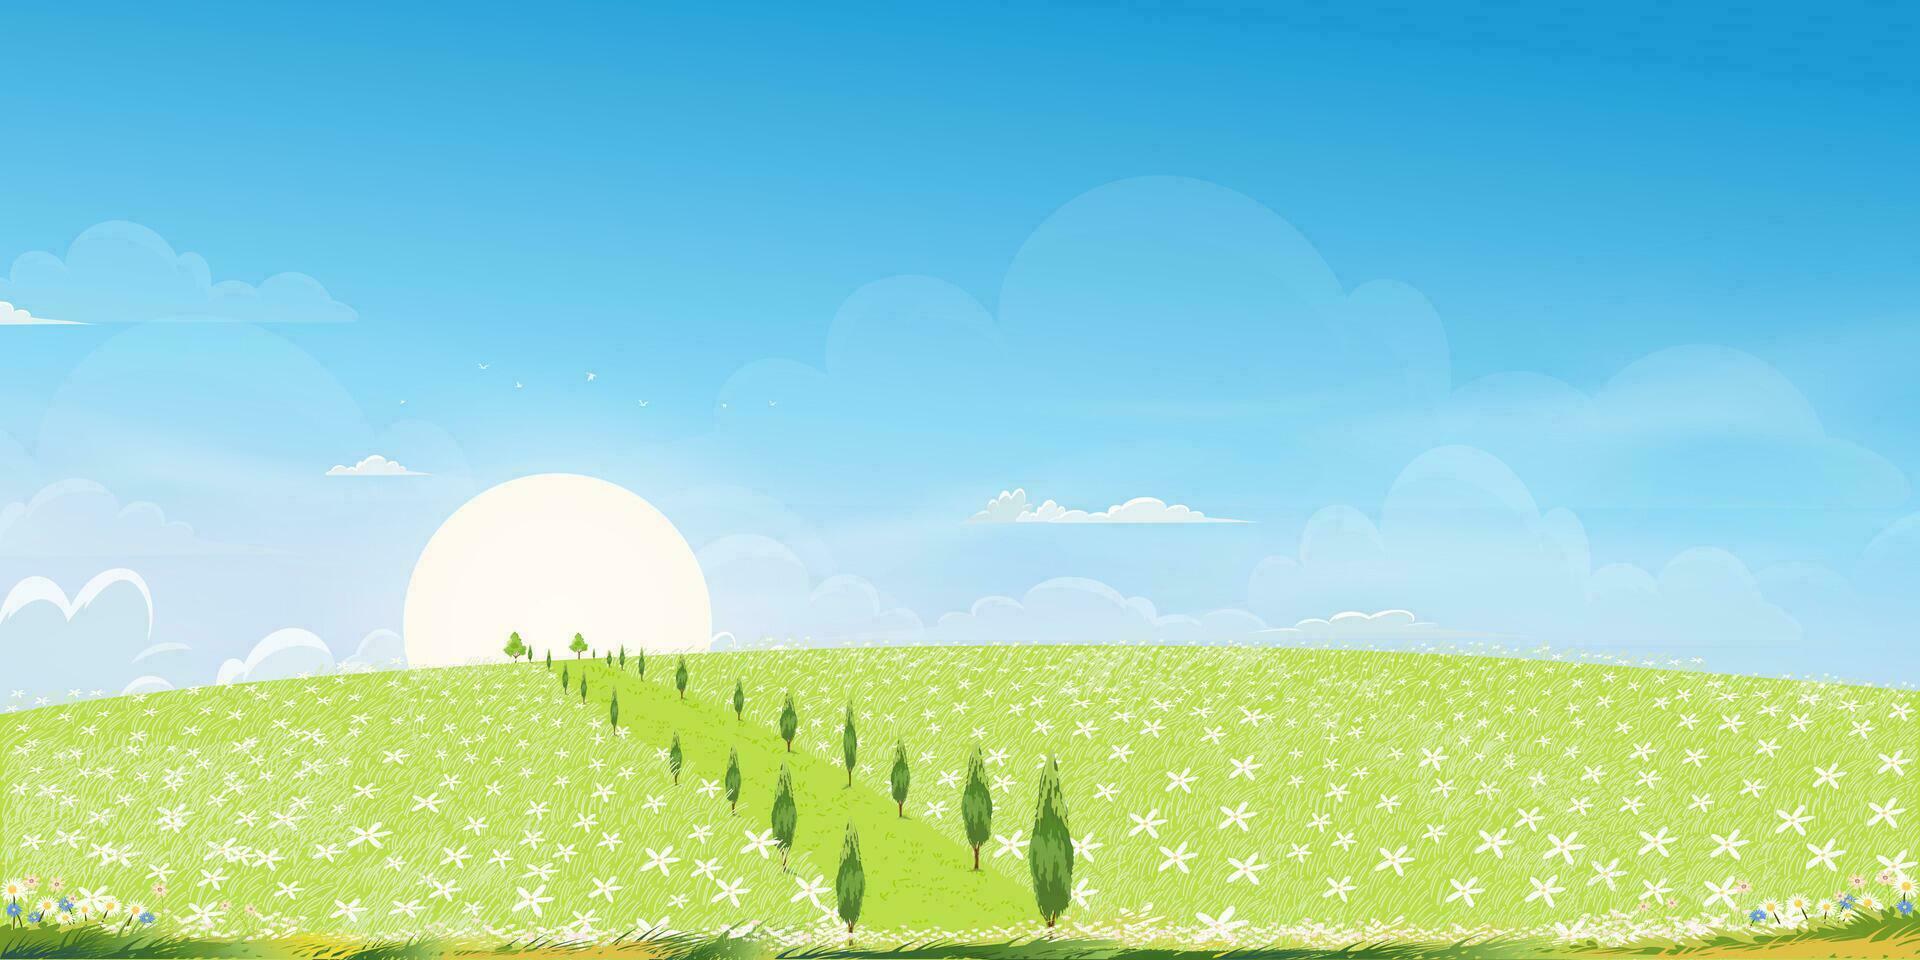 Spring Background with white flower daisy fields landscape on hillswith Blue Sky and Clouds,Beautiful Naturein Summer rural with wild grass flowers,Cartoon Vector illustration backdrop banner